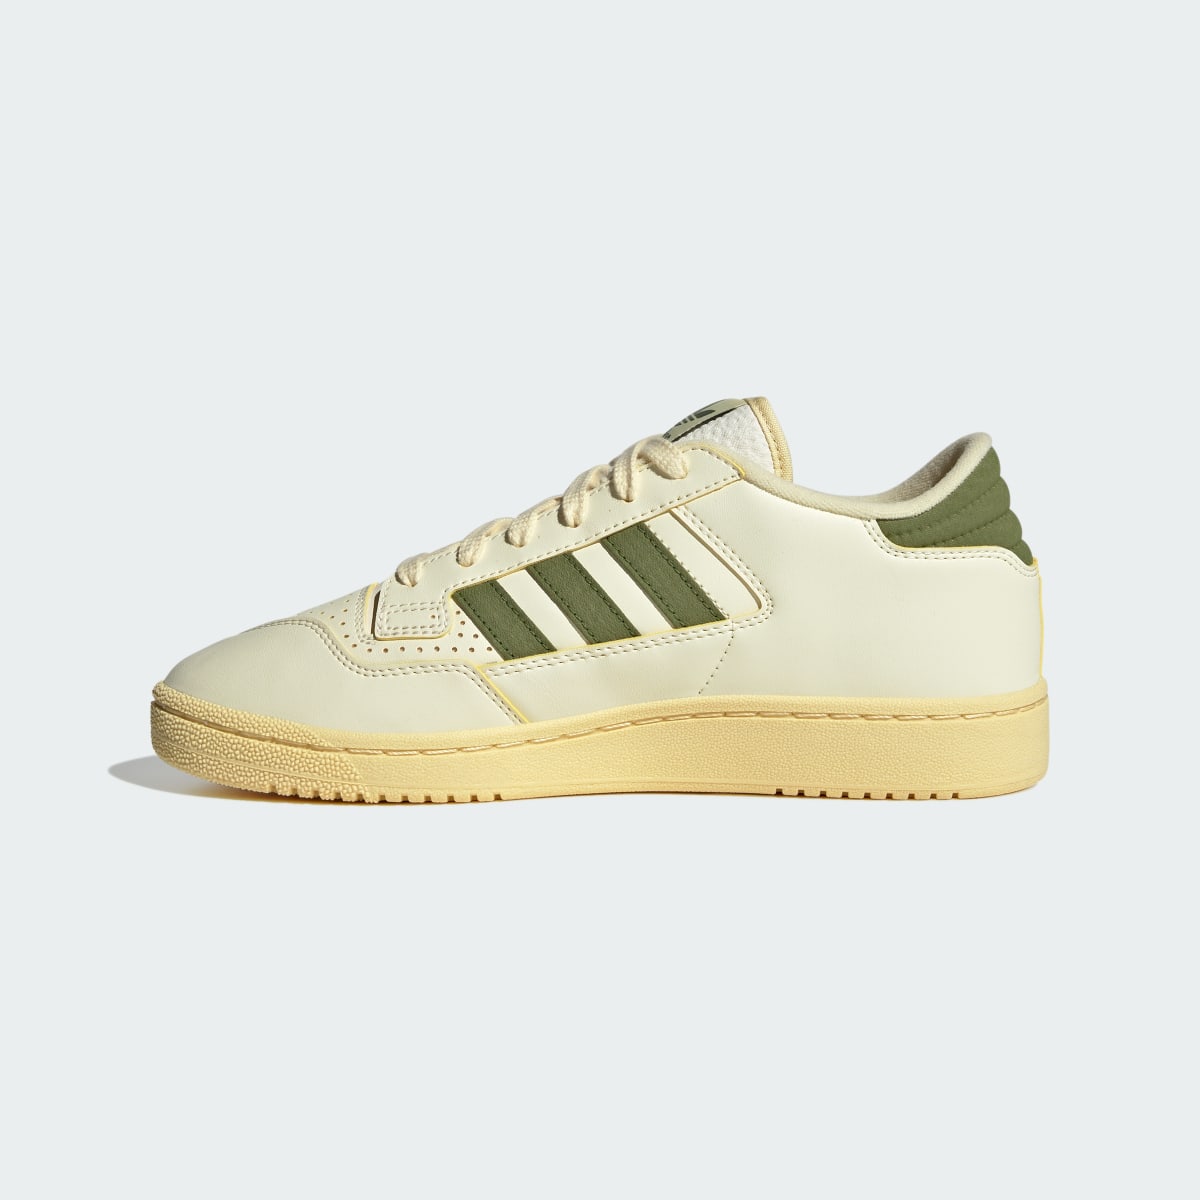 Adidas Centennial Low END. Trainers. 6